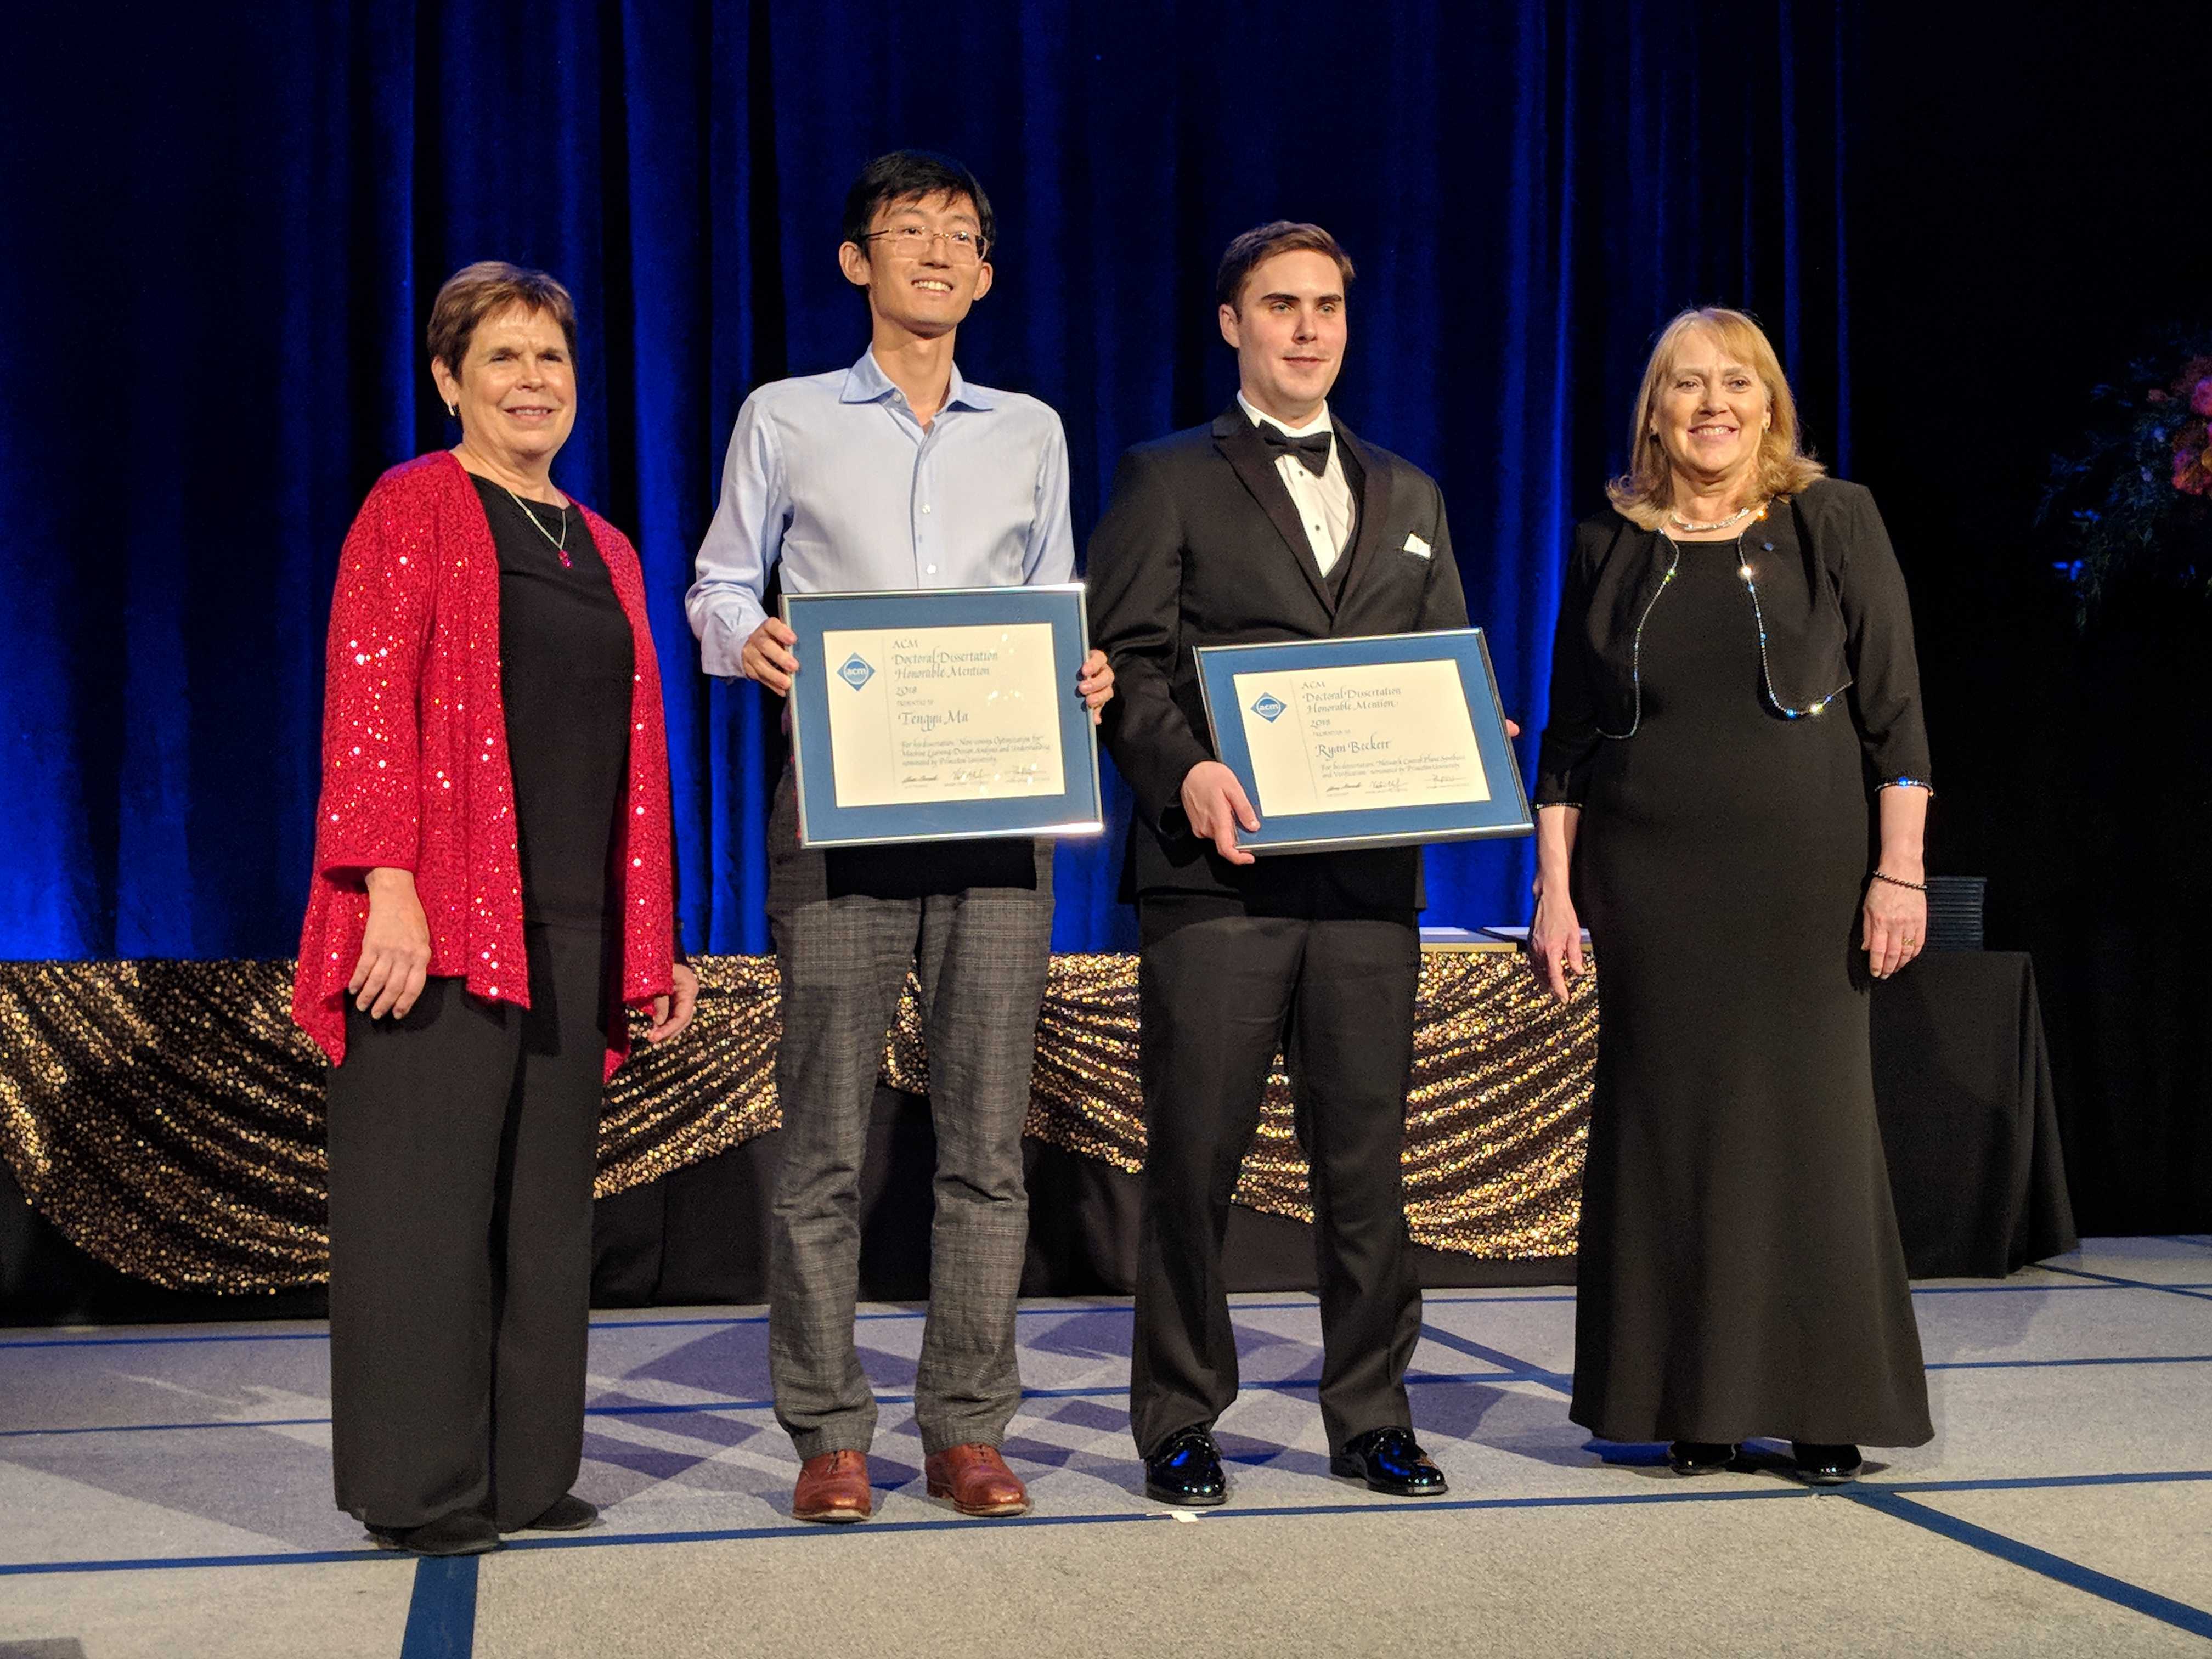 Tengyu Ma and Ryan Beckett accept Honorable Mentions for ACM's Doctoral Dissertation Award for Outstanding Ph.D. Thesis at the awards banquet.